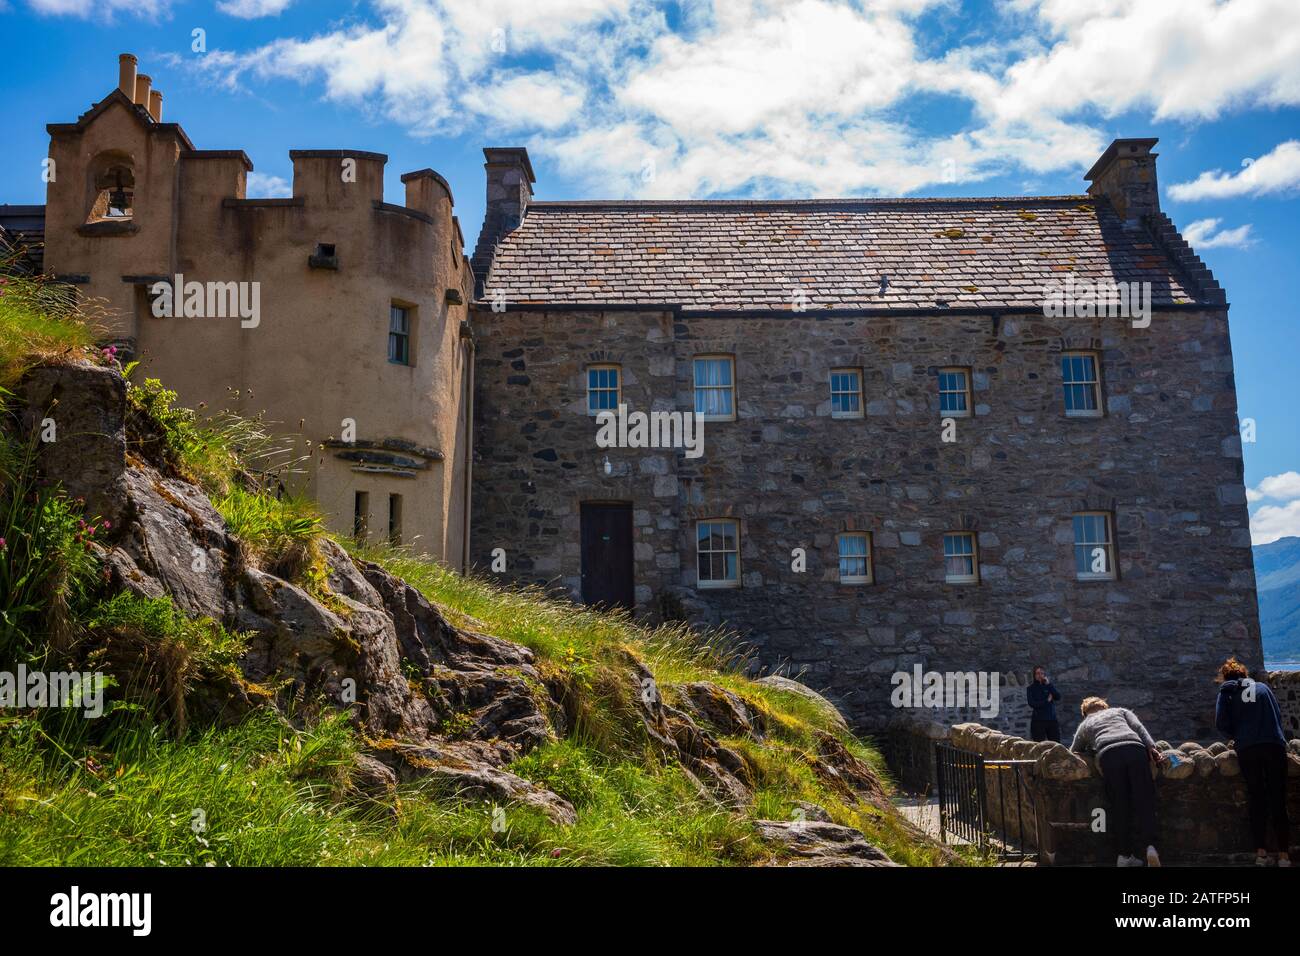 Dornie, Scotland/UK-June 26, 2019: Eilean Donan Castle, a 13th Century Castle in the Highlands of Scotland, UK, is a site that frequently appears in p Stock Photo